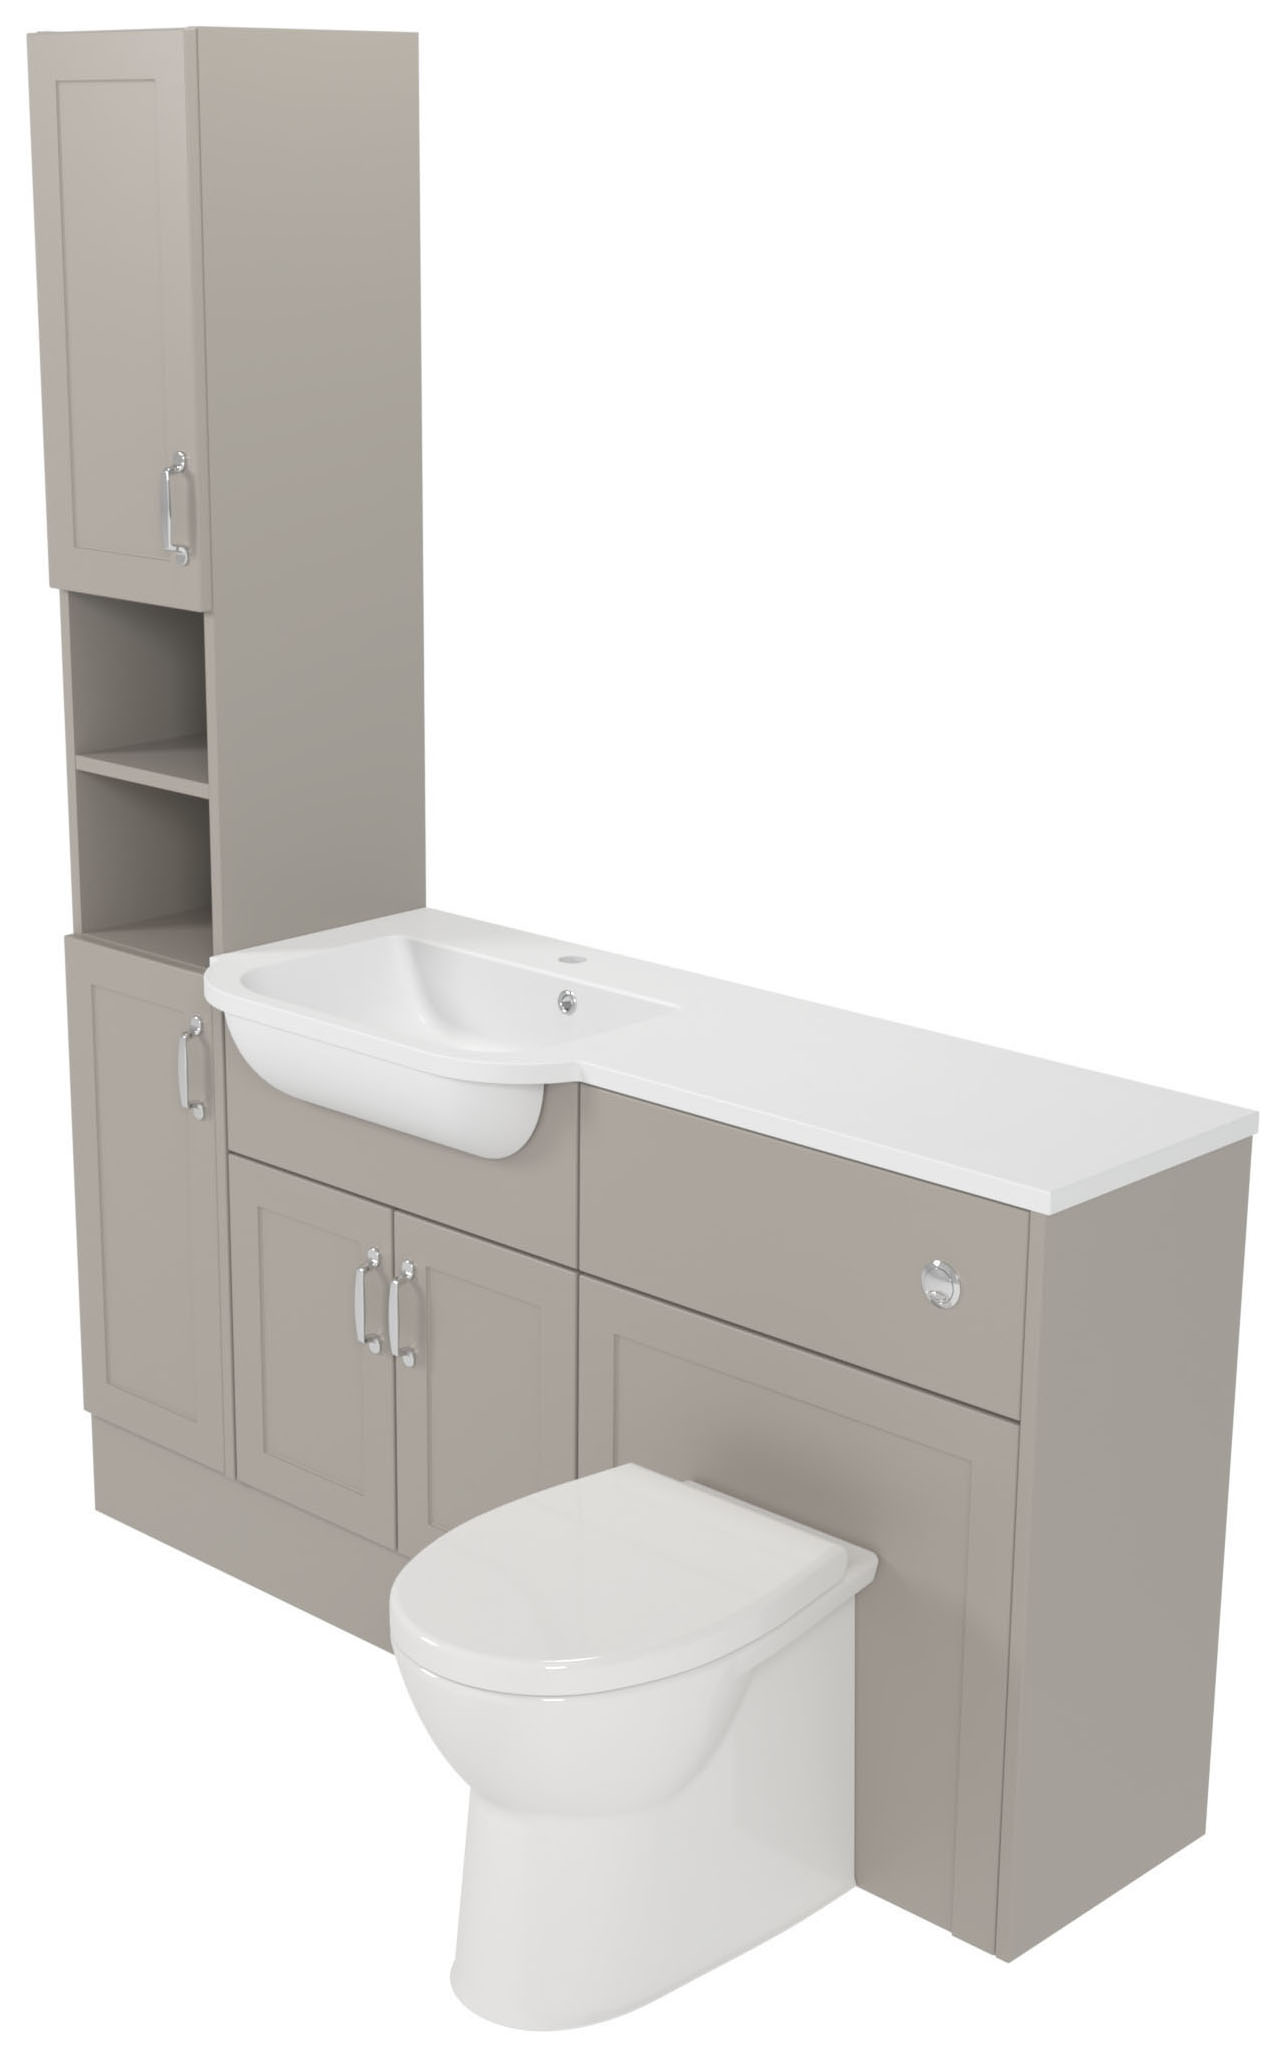 Deccado Padworth Soft Suede 1500mm Fitted Tower, Vanity & Toilet Pan Unit Combination with Basin